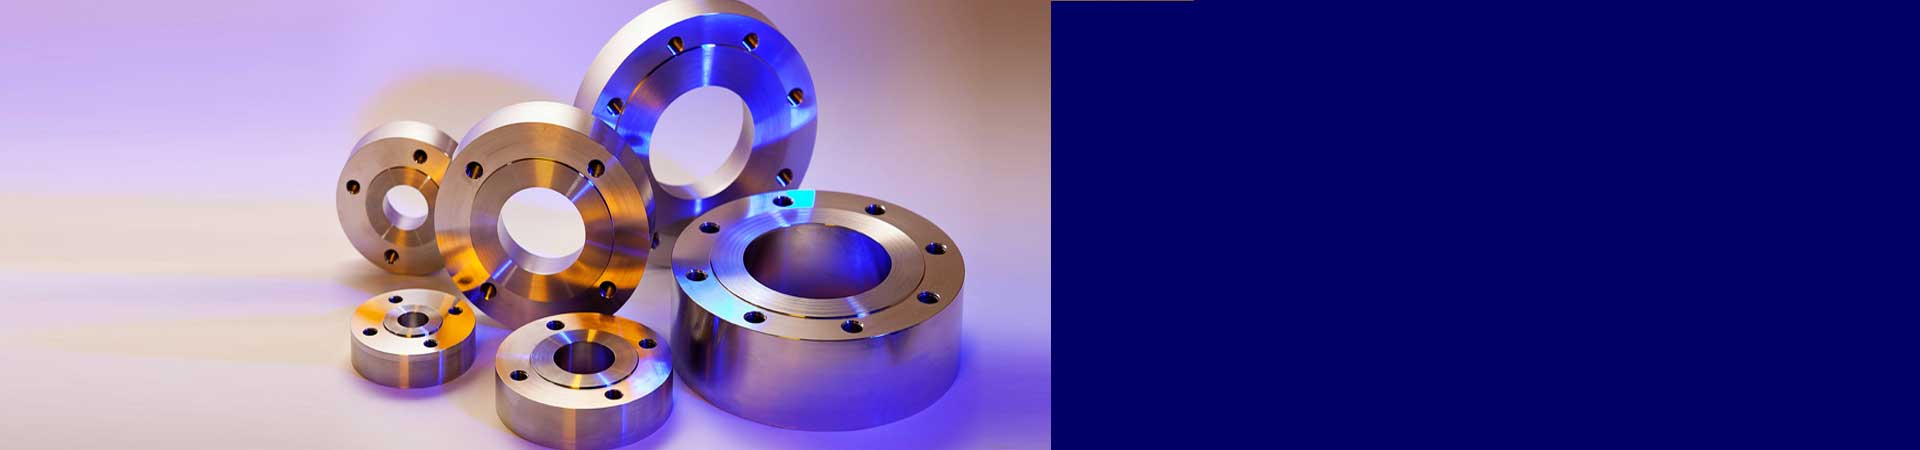 ss flanges manufacturer & supplier in india